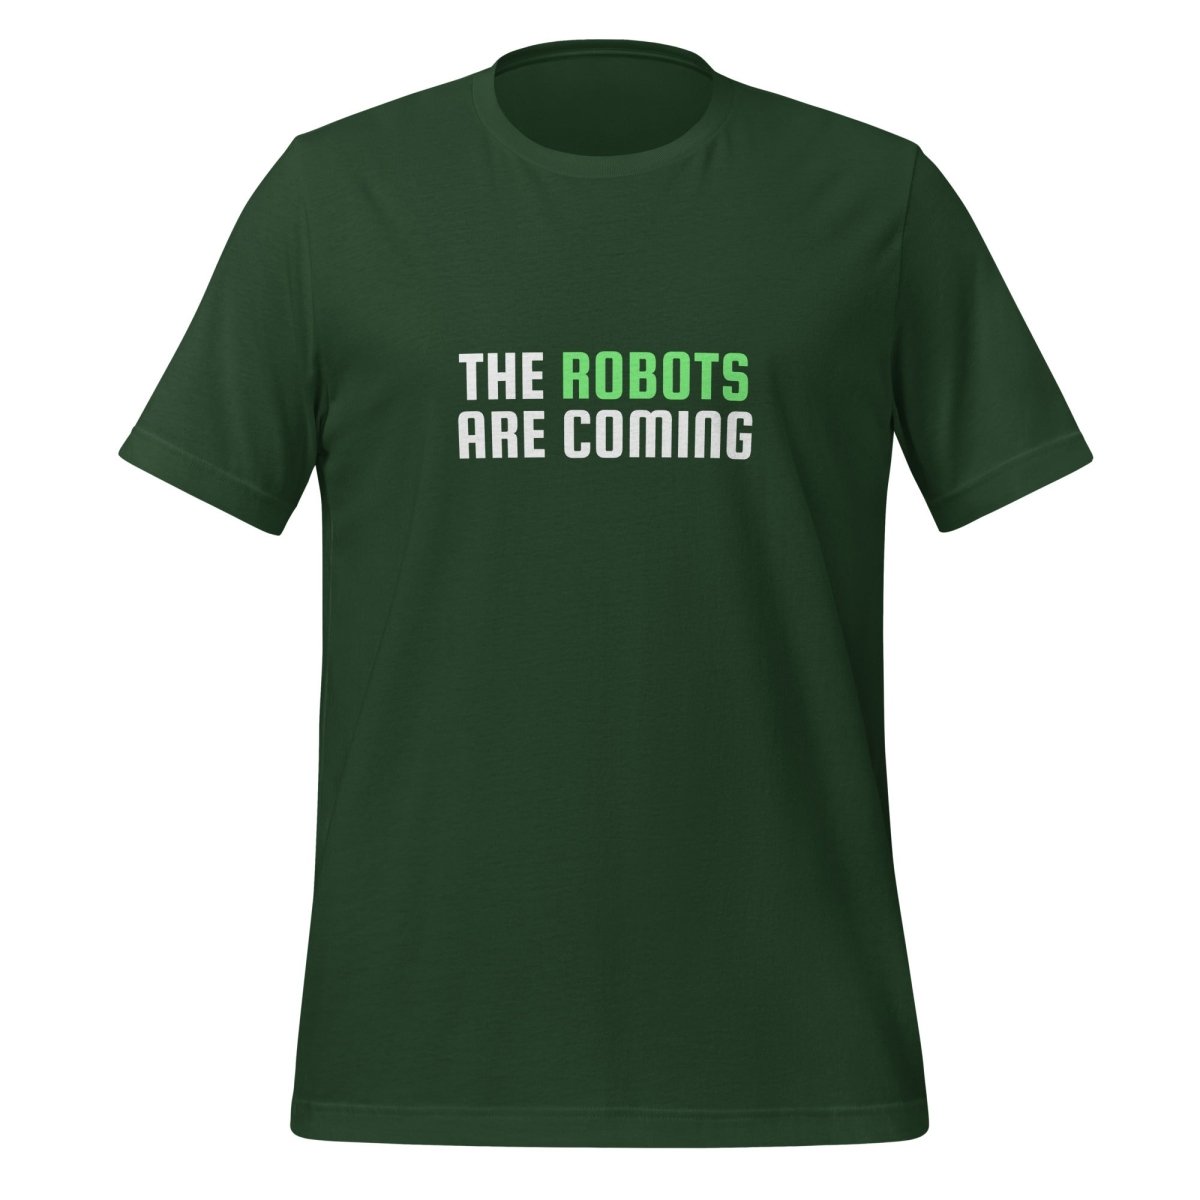 The Robots Are Coming (Green) T - Shirt 2 (unisex) - Forest - AI Store